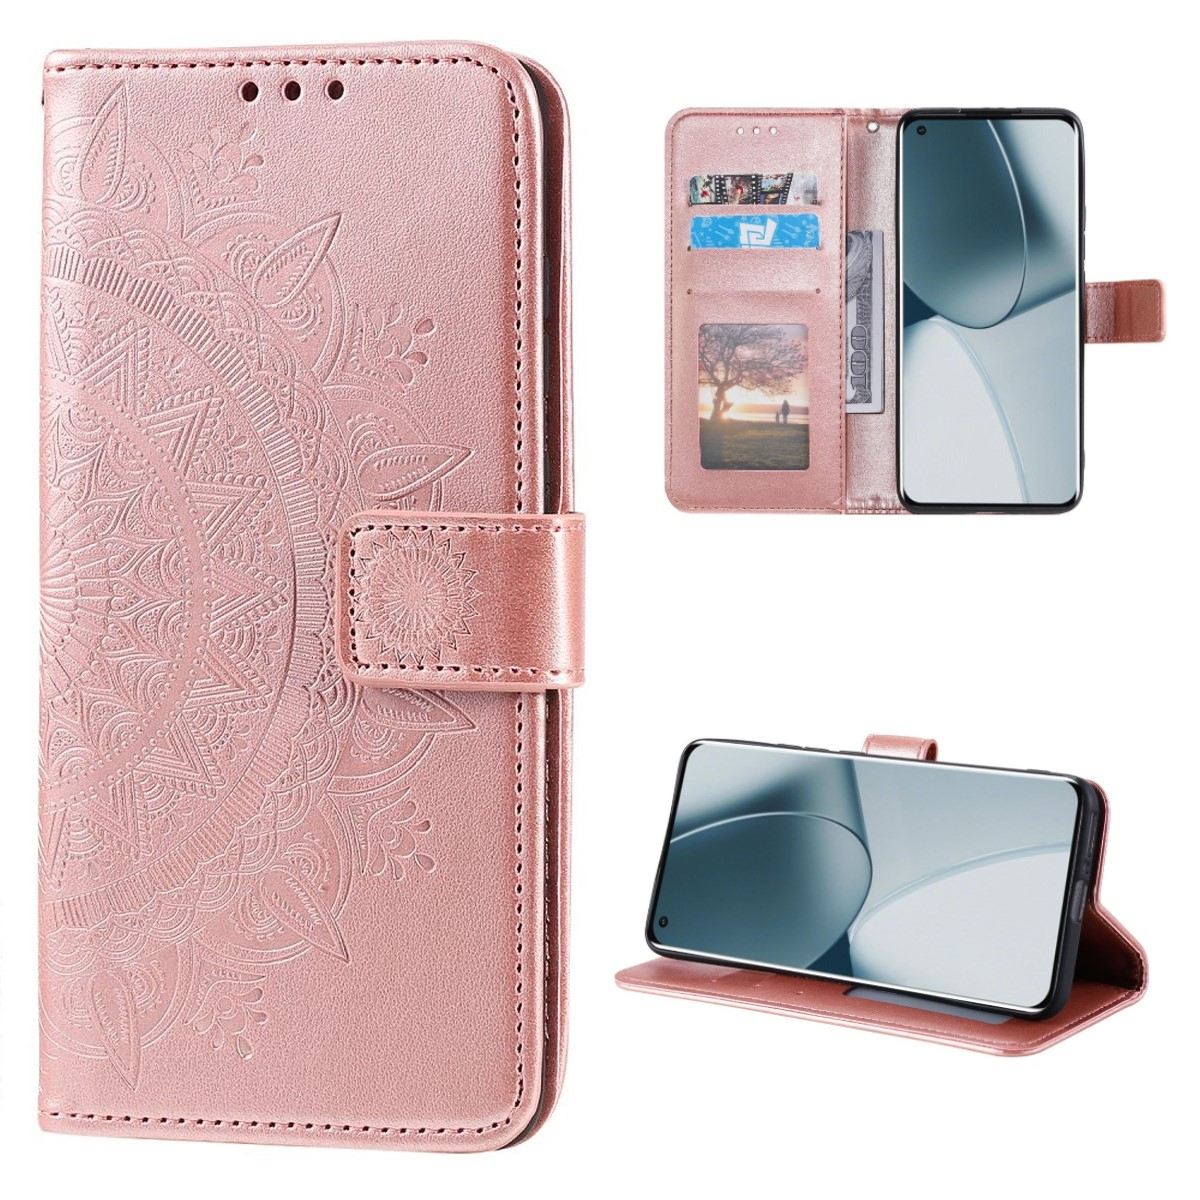 COVERKINGZ Klapphülle Bookcover, 10 Pro OnePlus, Muster, Mandala 5G, mit Rosegold